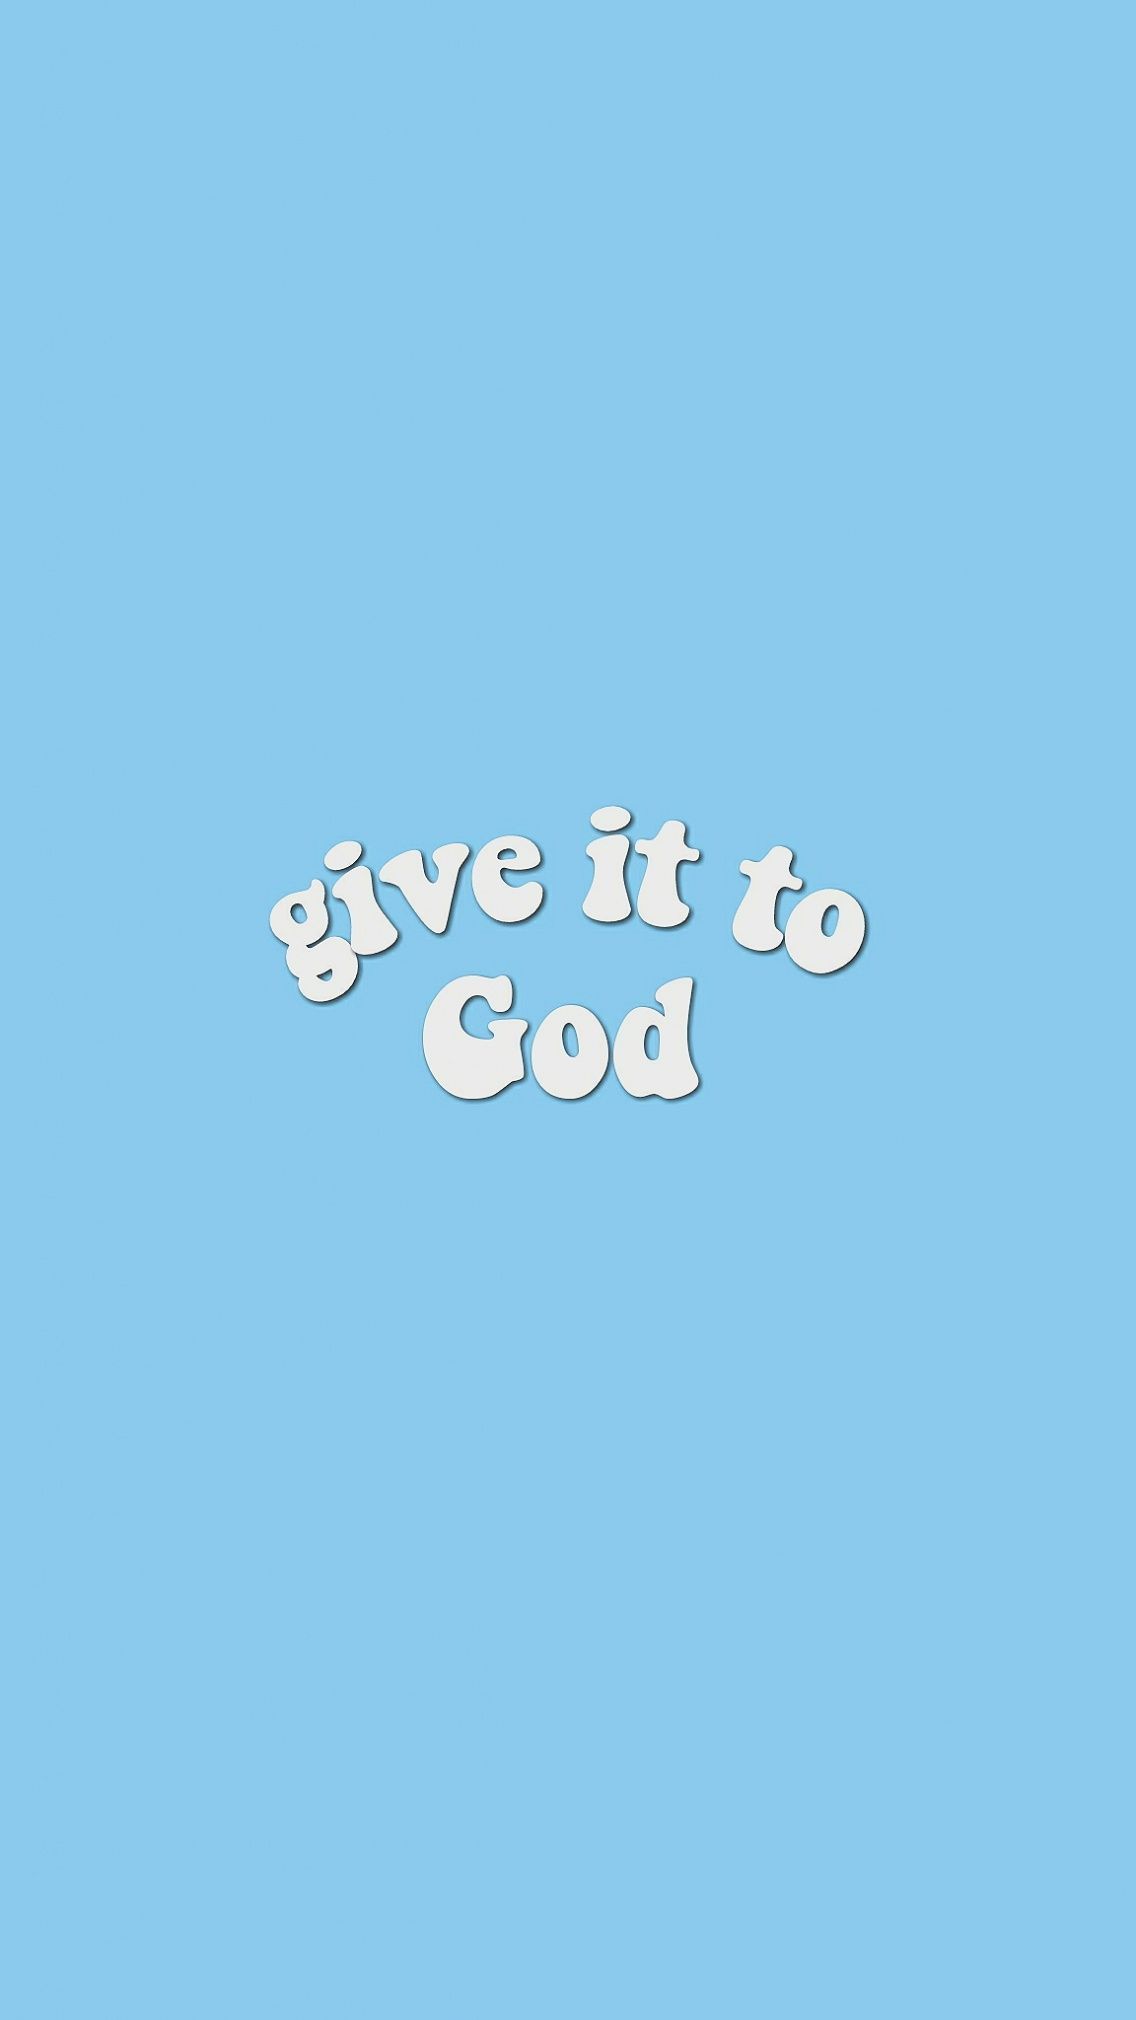 Give it to god - VSCO